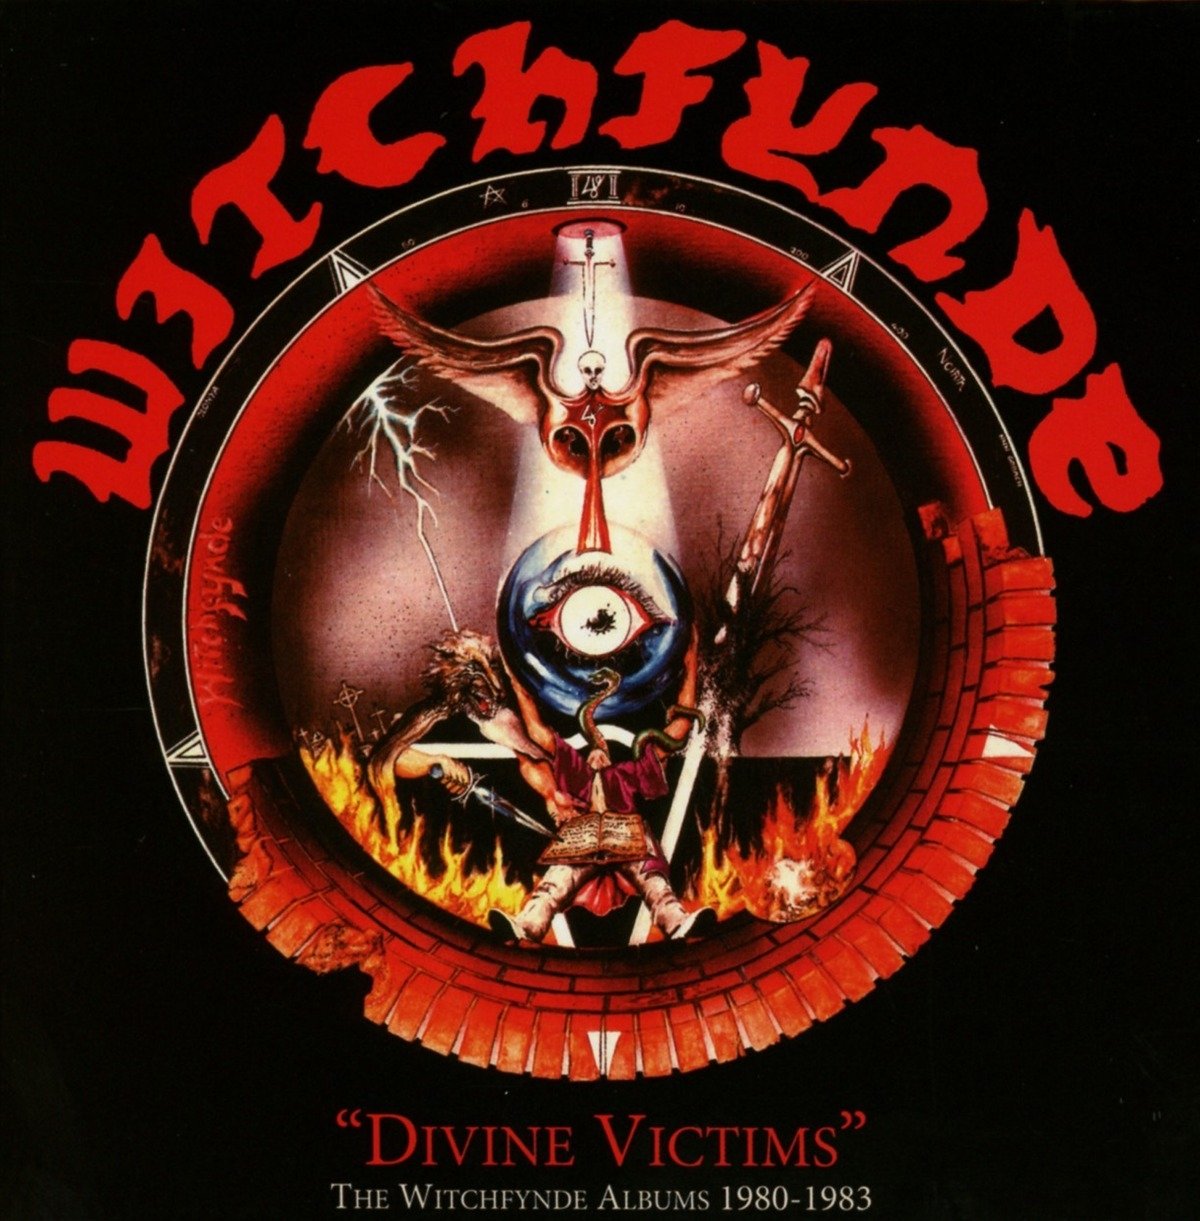 Witchfynde-Divine Victims The Witchfynde Albums 1980-1983-3CD-FLAC-2017-CATARACT Download